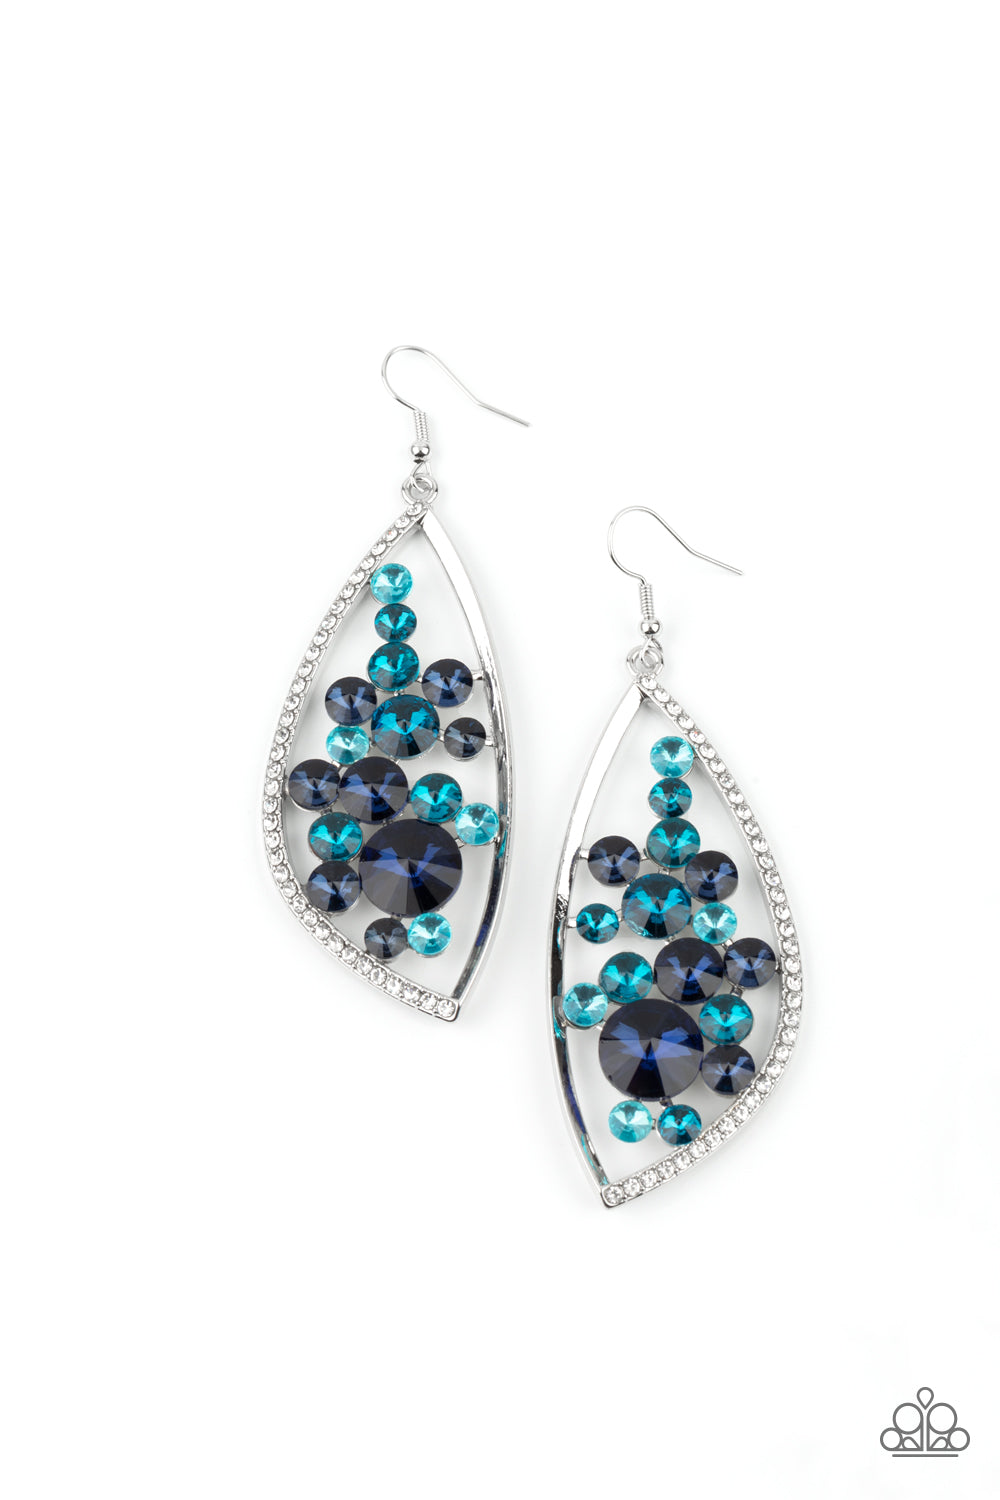 Sweetly Effervescent Blue Earring - Paparazzi Accessories  A bubbly collection of light to dark blue rhinestones coalesce inside an asymmetrical silver frame. One side of the frame is encrusted in glassy white rhinestones, adding a refined flair to the bubbly lure. Earring attaches to a standard fishhook fitting.  All Paparazzi Accessories are lead free and nickel free!  Sold as one pair of earrings.